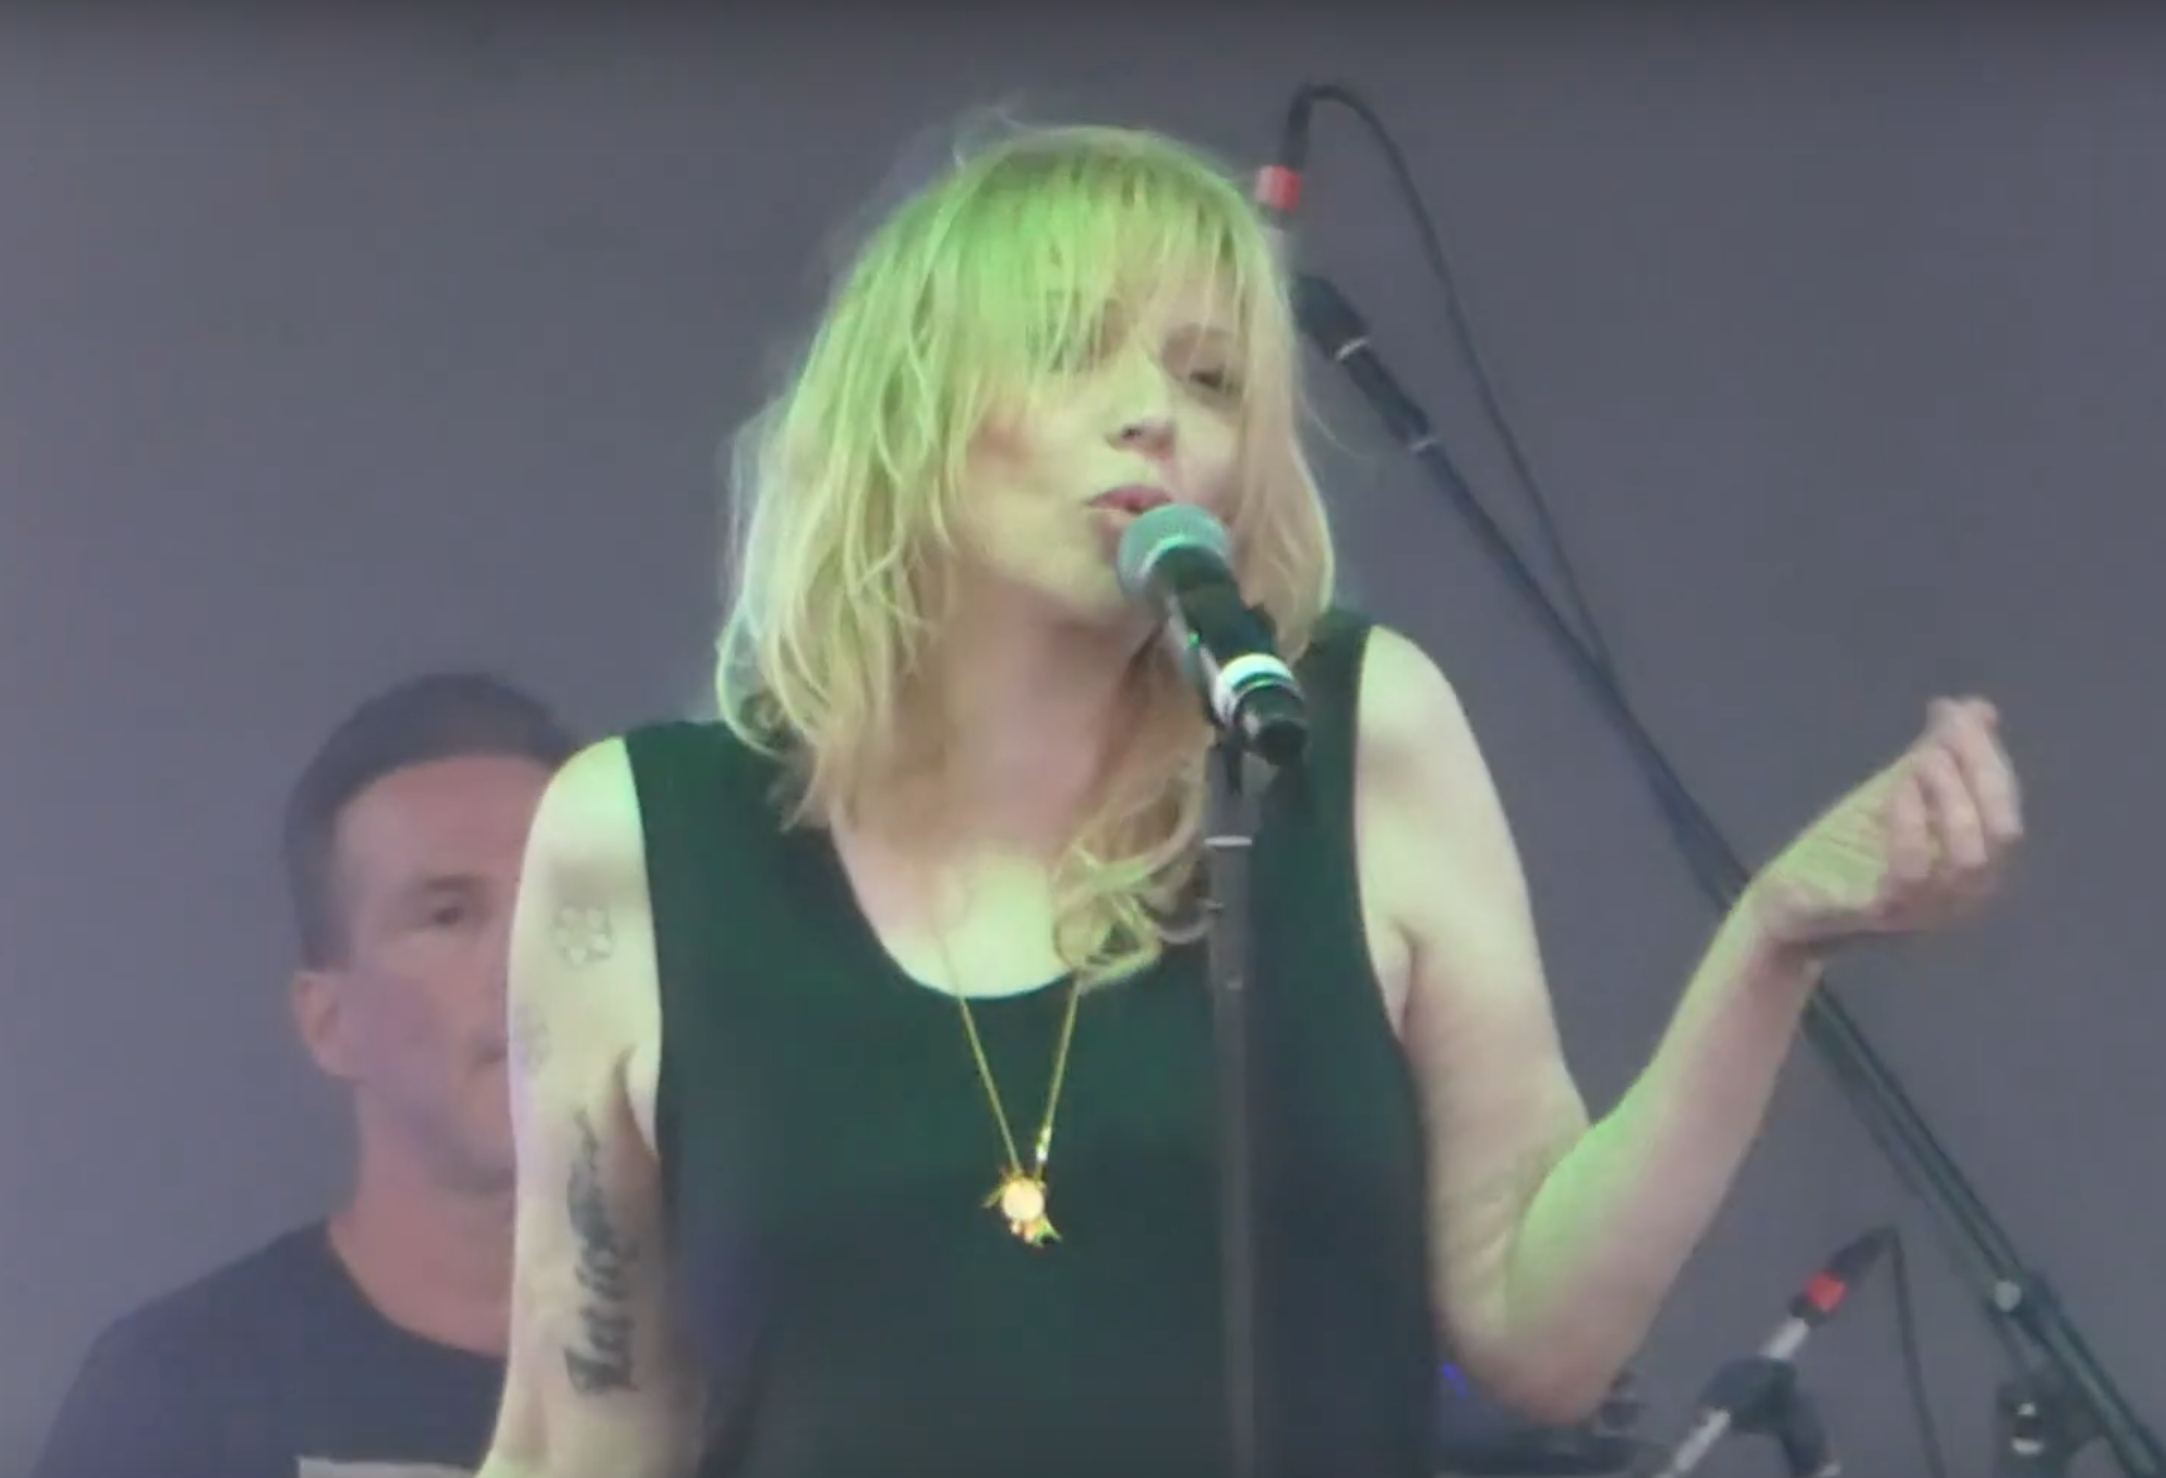 Courtney Love and Chrissie Hynde Slam Rock Hall's 'Sexist Gatekeeping' and 'Establishment Backslapping'